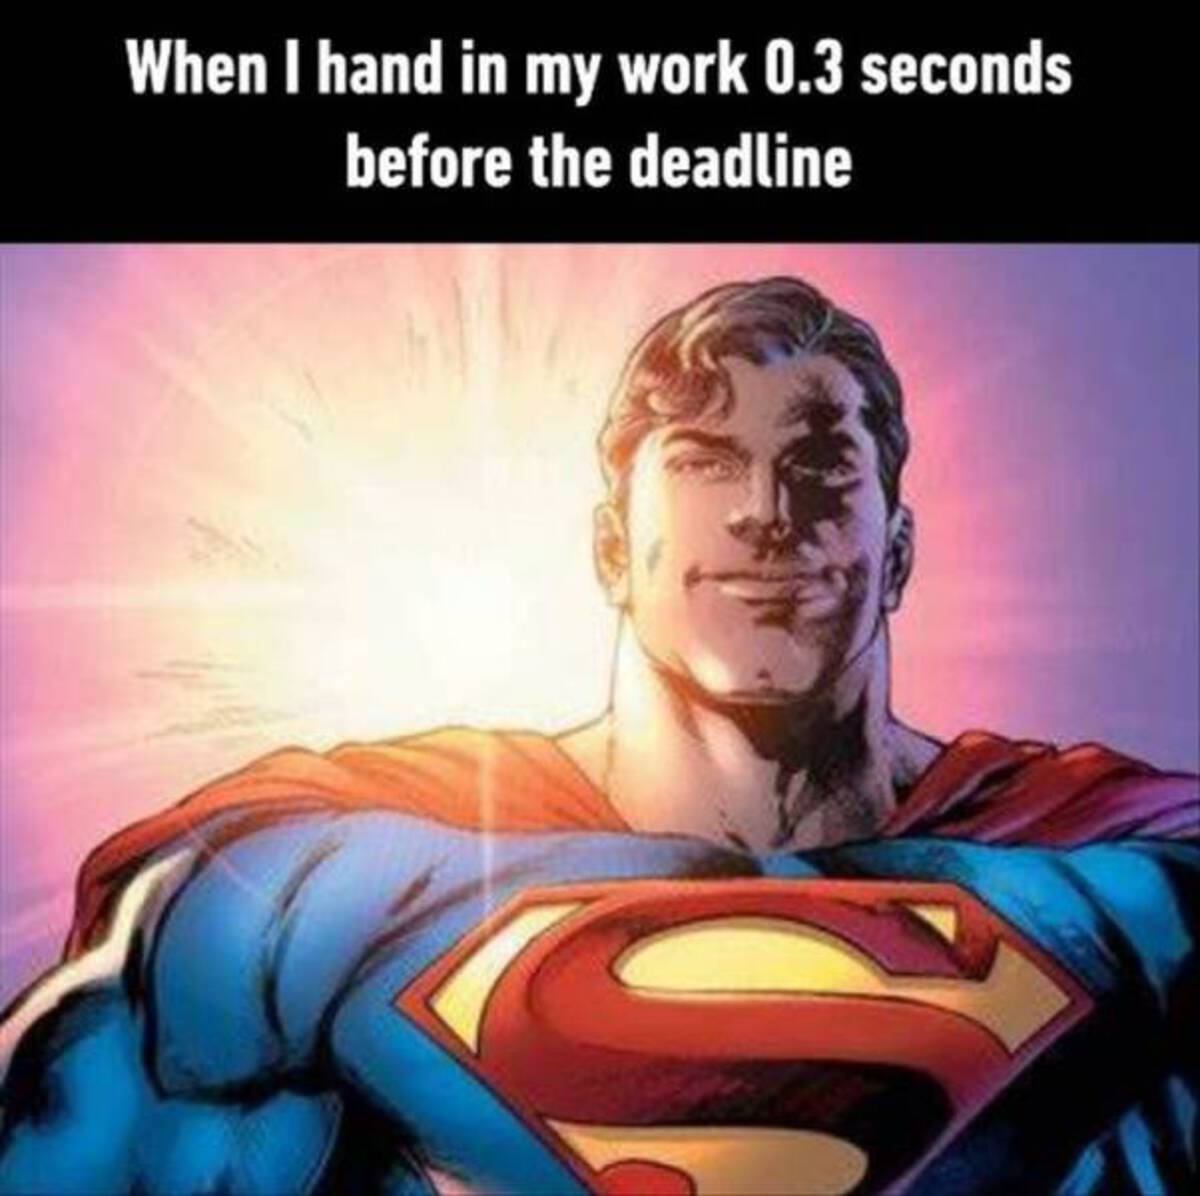 starman superman - When I hand in my work 0.3 seconds before the deadline